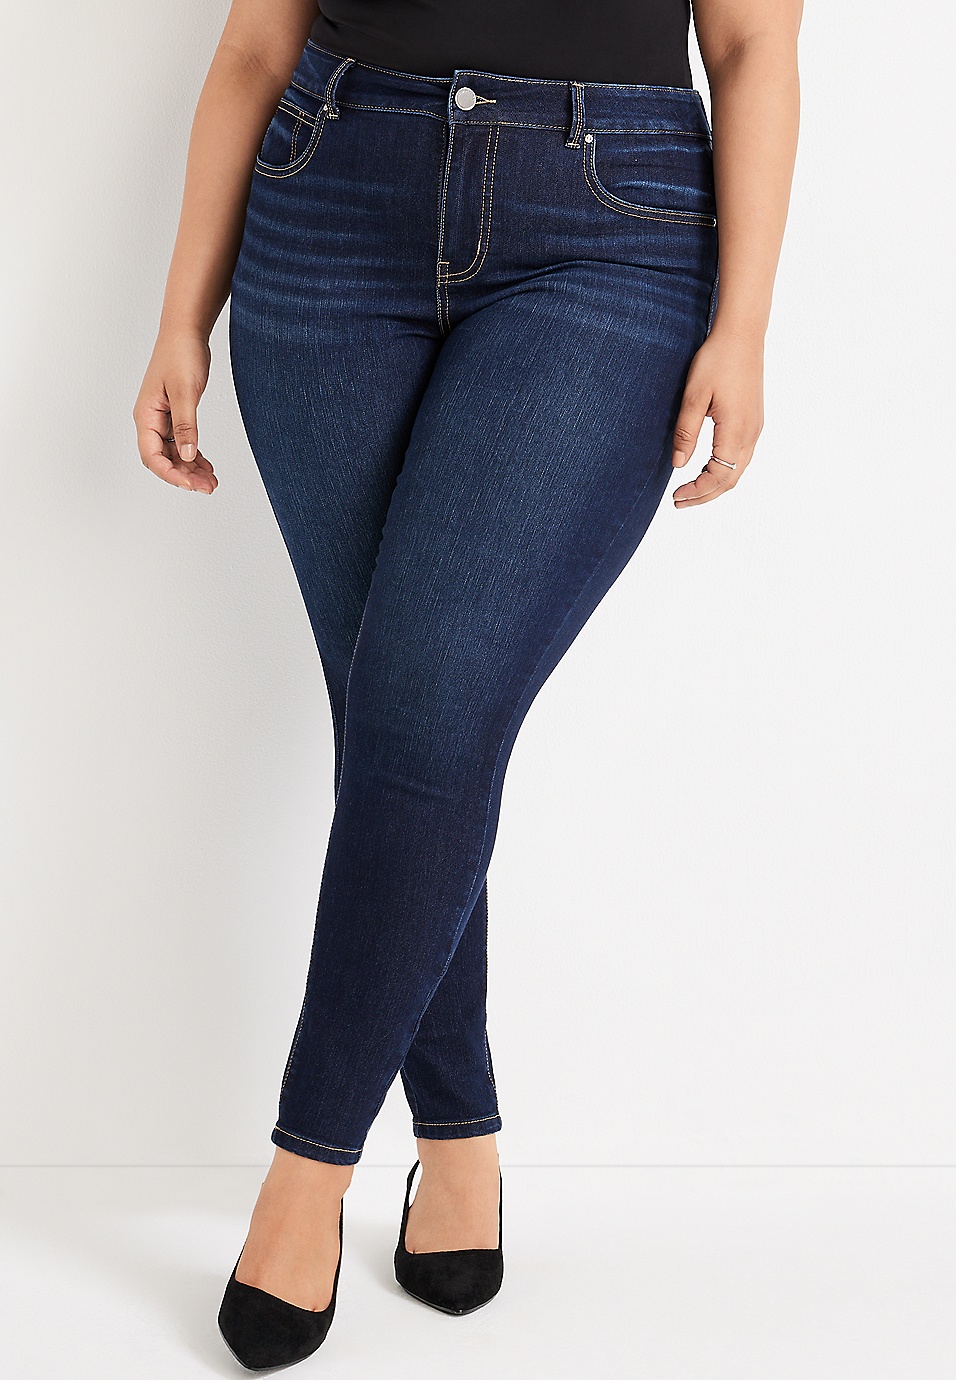 Plus Size jeans by maurices™ Everflex™ Super Skinny Curvy High Rise Jean | maurices